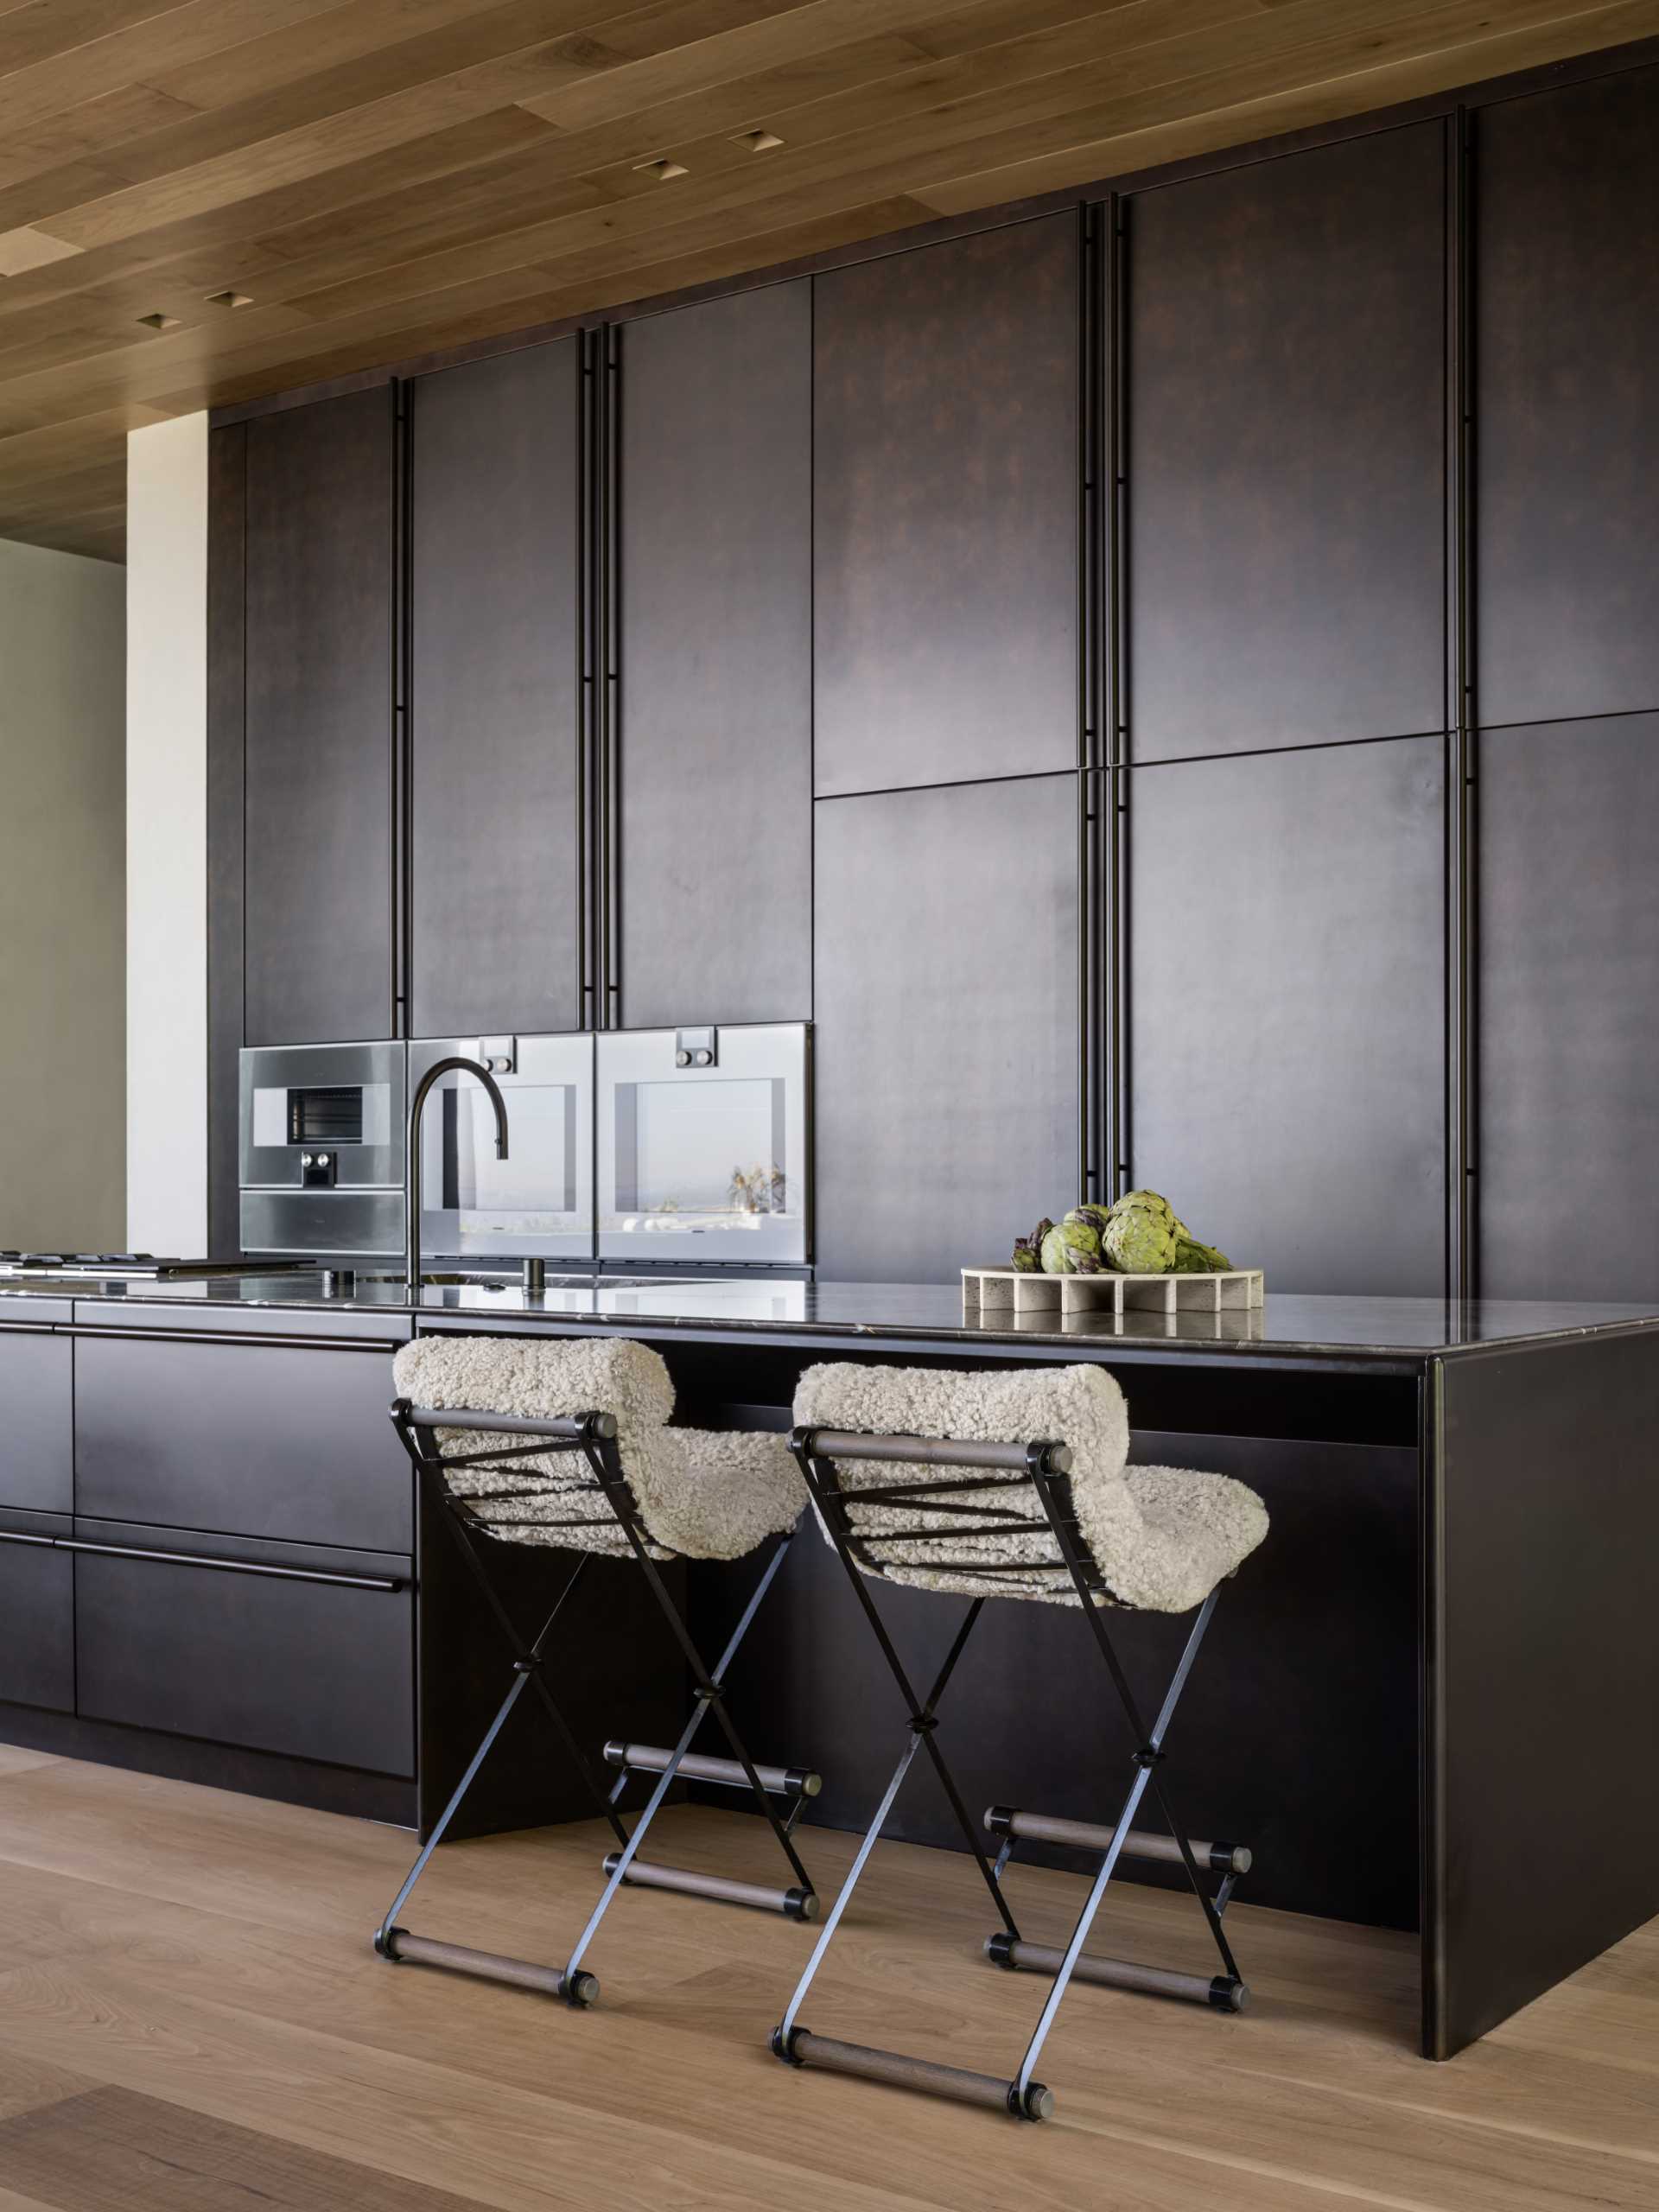 This modern kitchen makes a bold statement, with matte black cabinets and double islands.